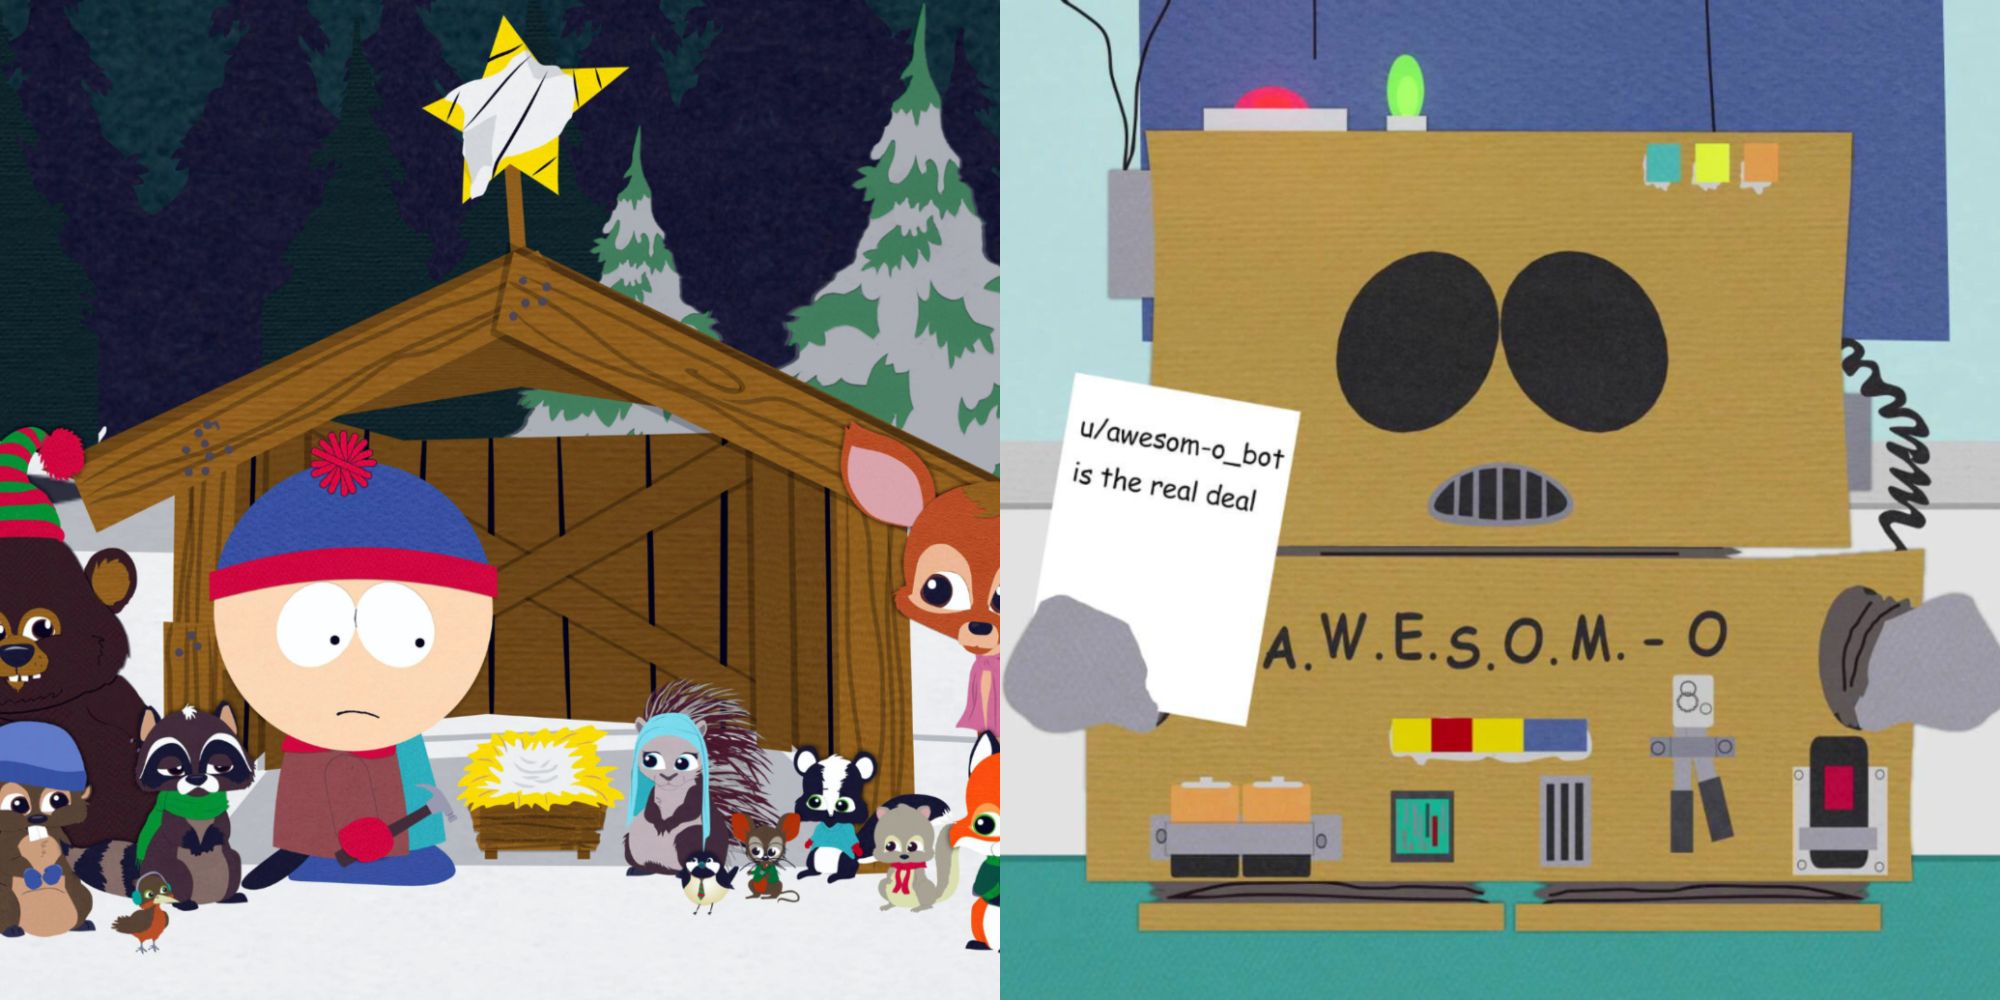 Split image showing Stan with woodland animals and the ASWESOM-O bot in South Park.